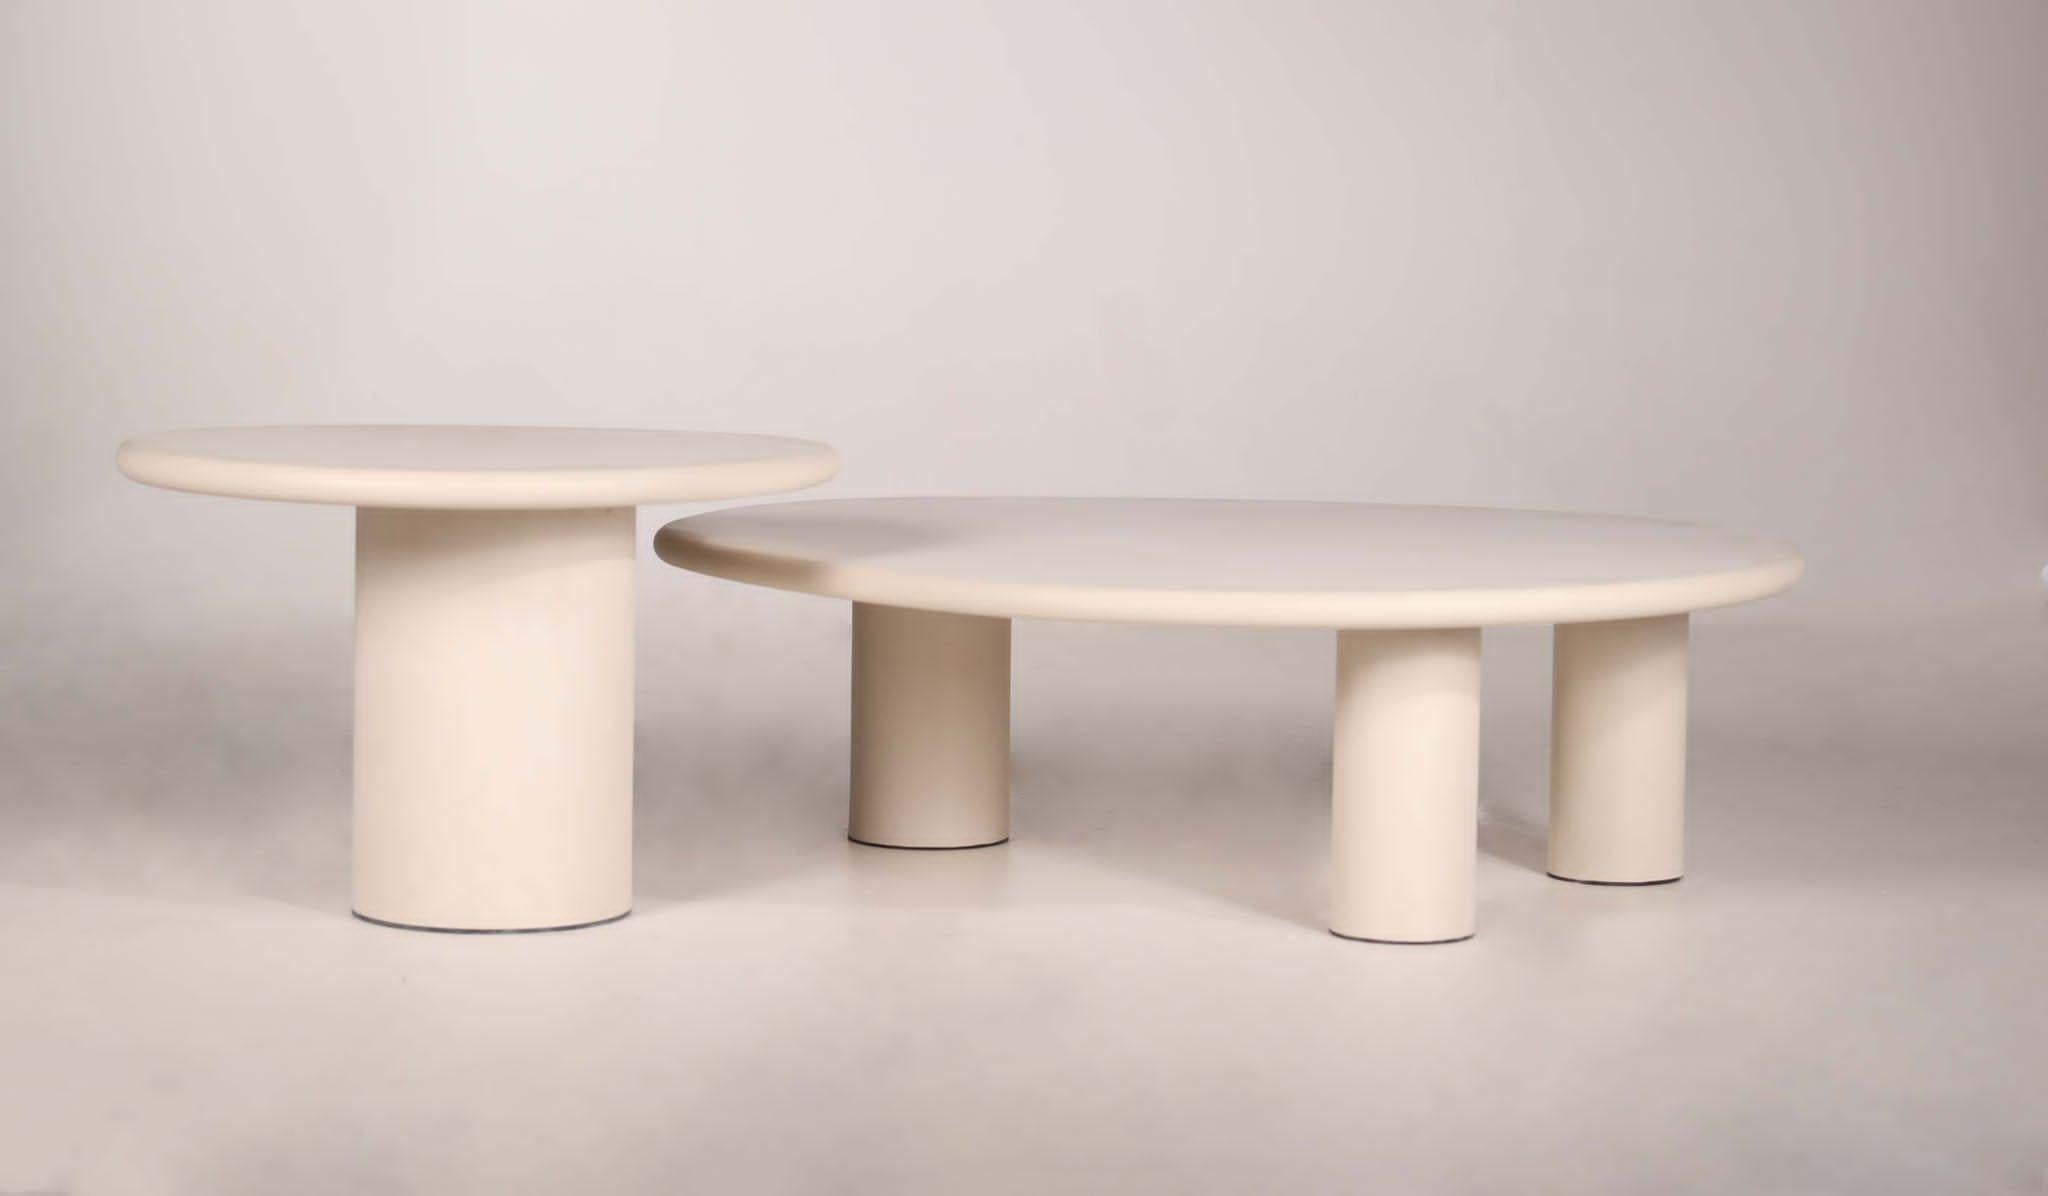 Belgian Handmade Outdoor Rock-Shaped Natural Plaster Table Set by Philippe Colette